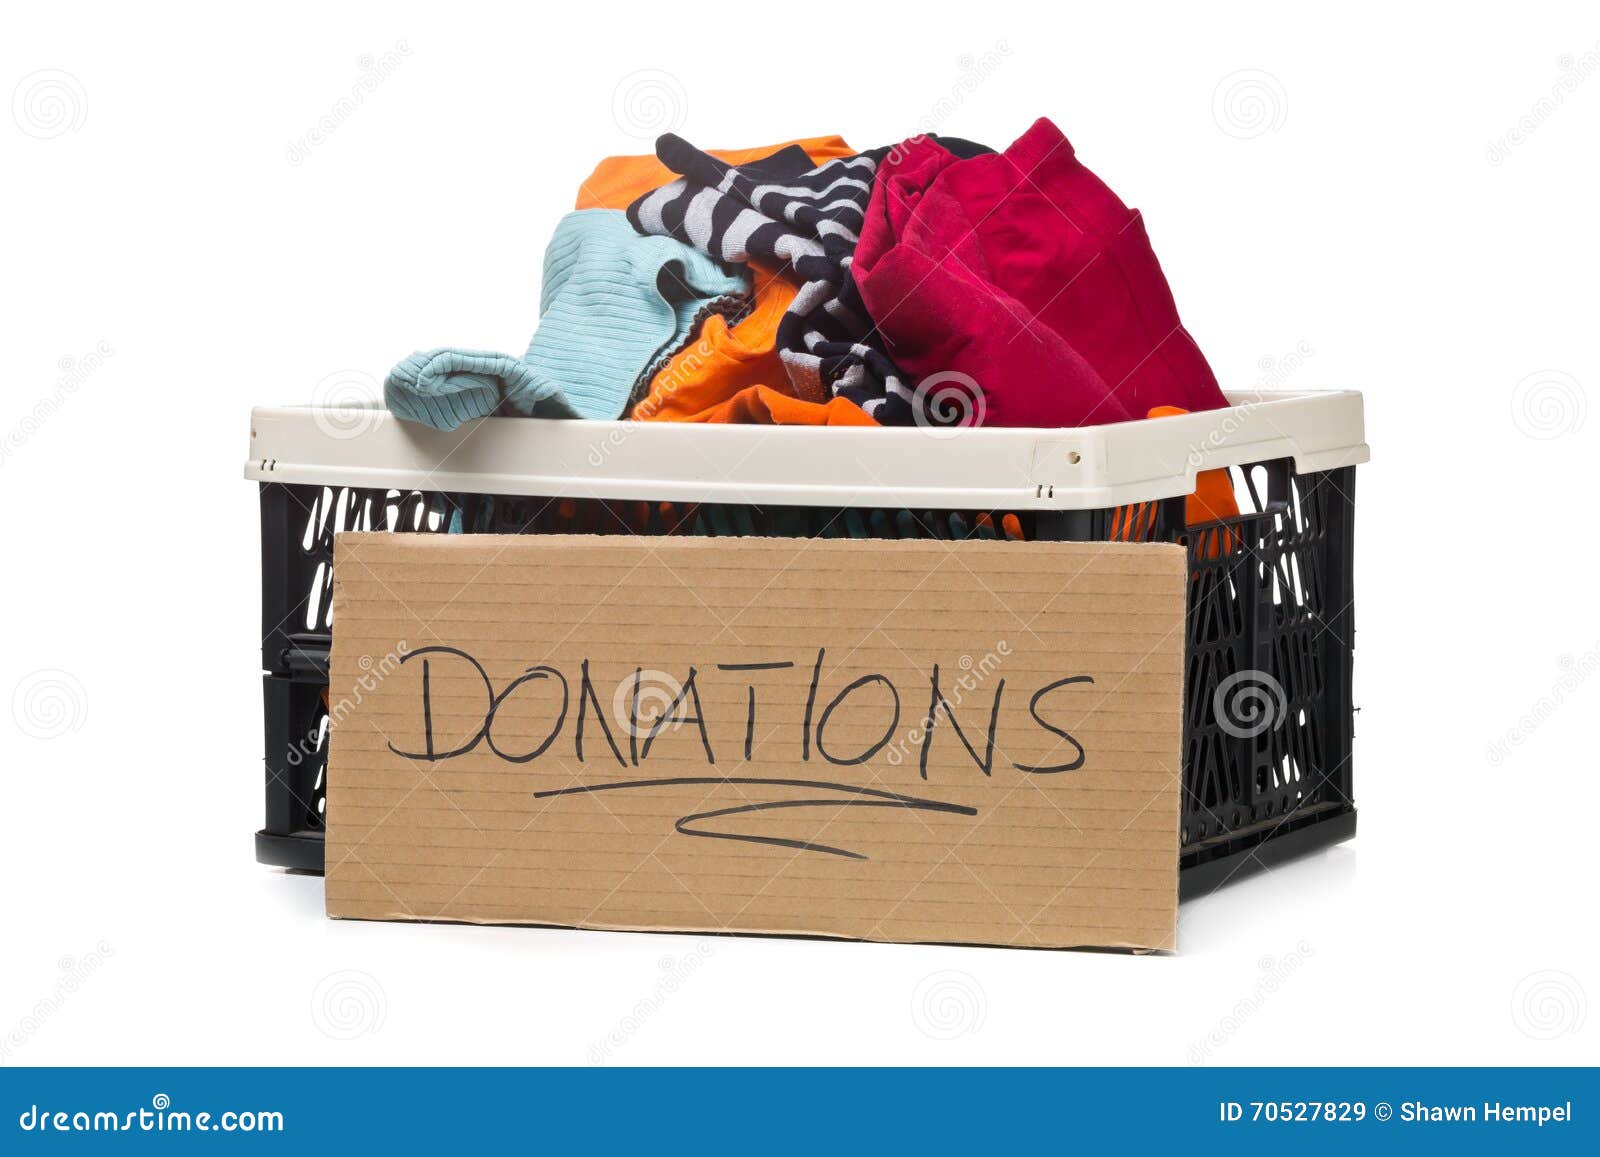 plastic box with clothing donations and cardboard sign